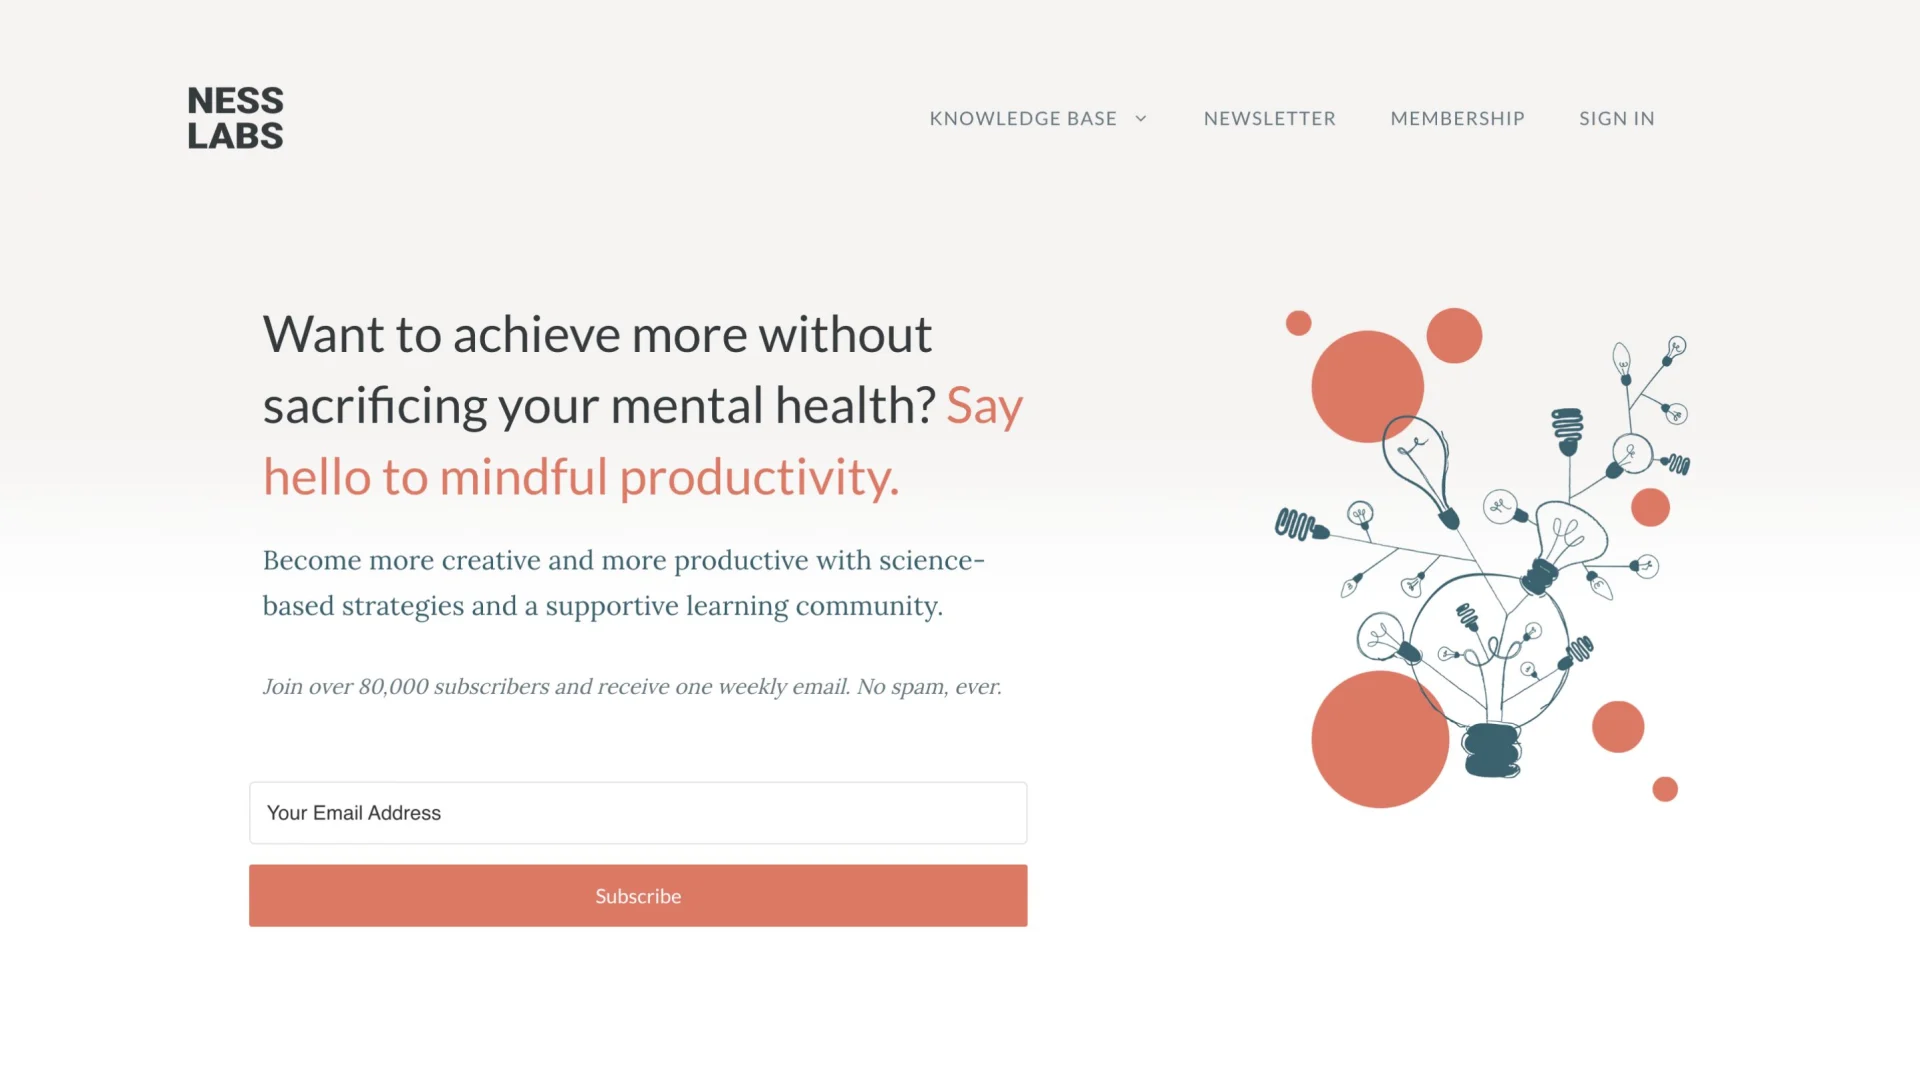 Ness Labs is a mindful productivity blog written by Anne-Laure Le Cunff.